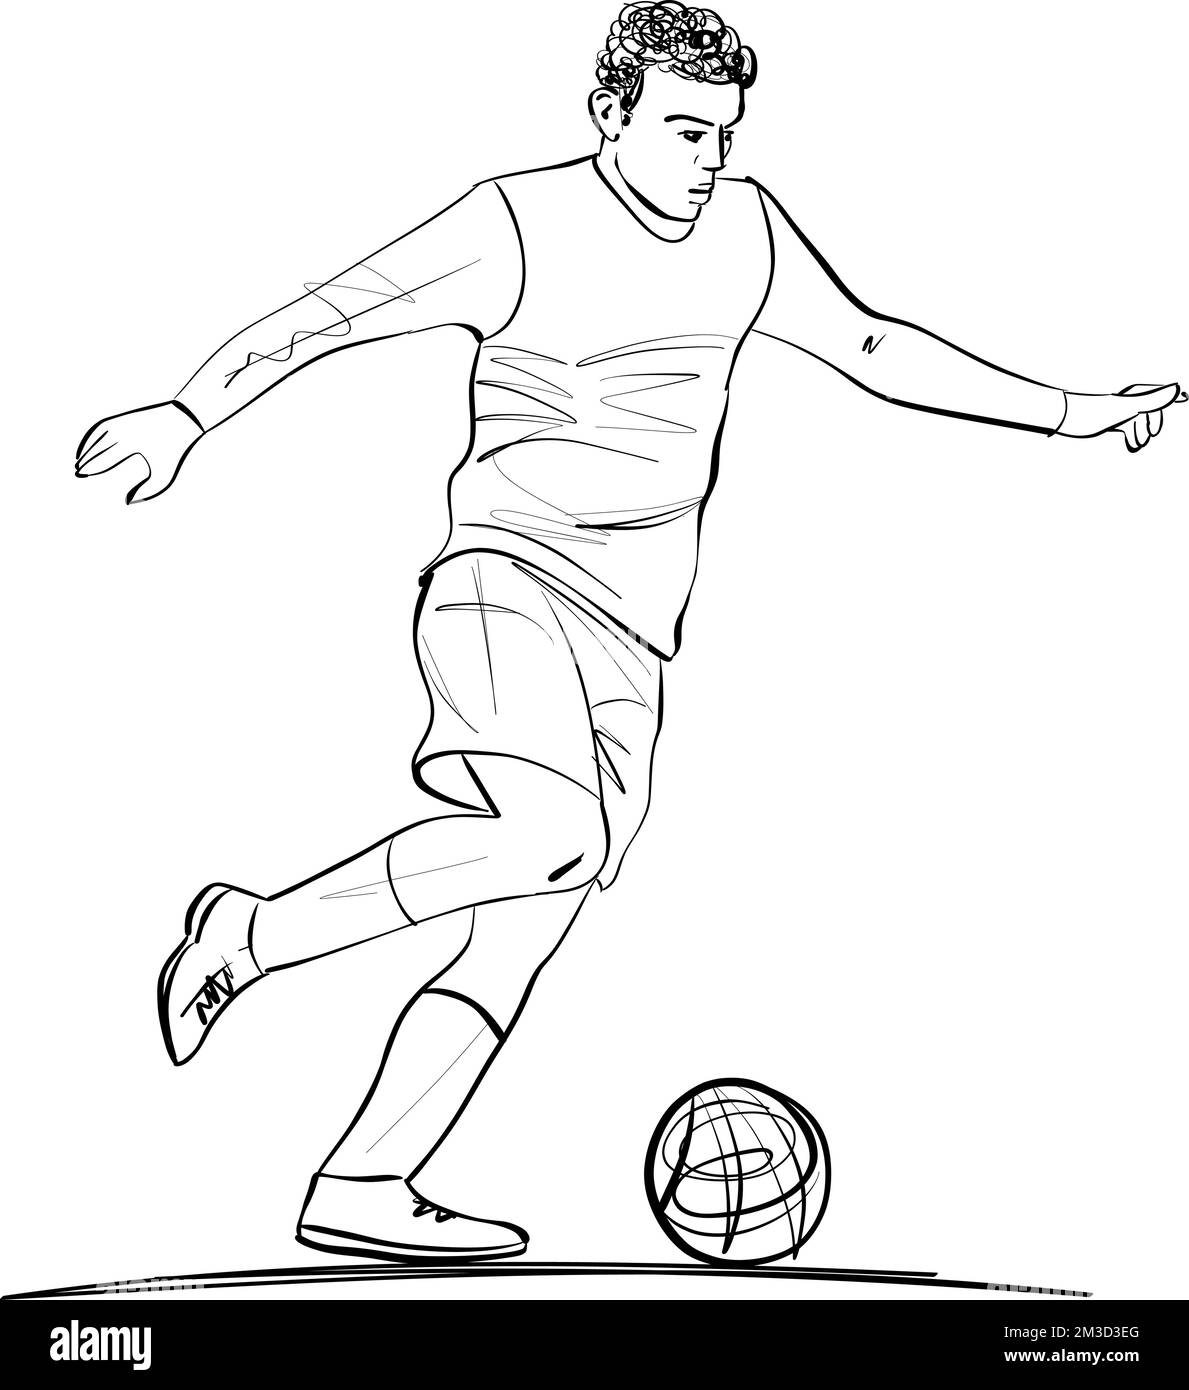 Memory drawing ll How to draw children playing football  YouTube